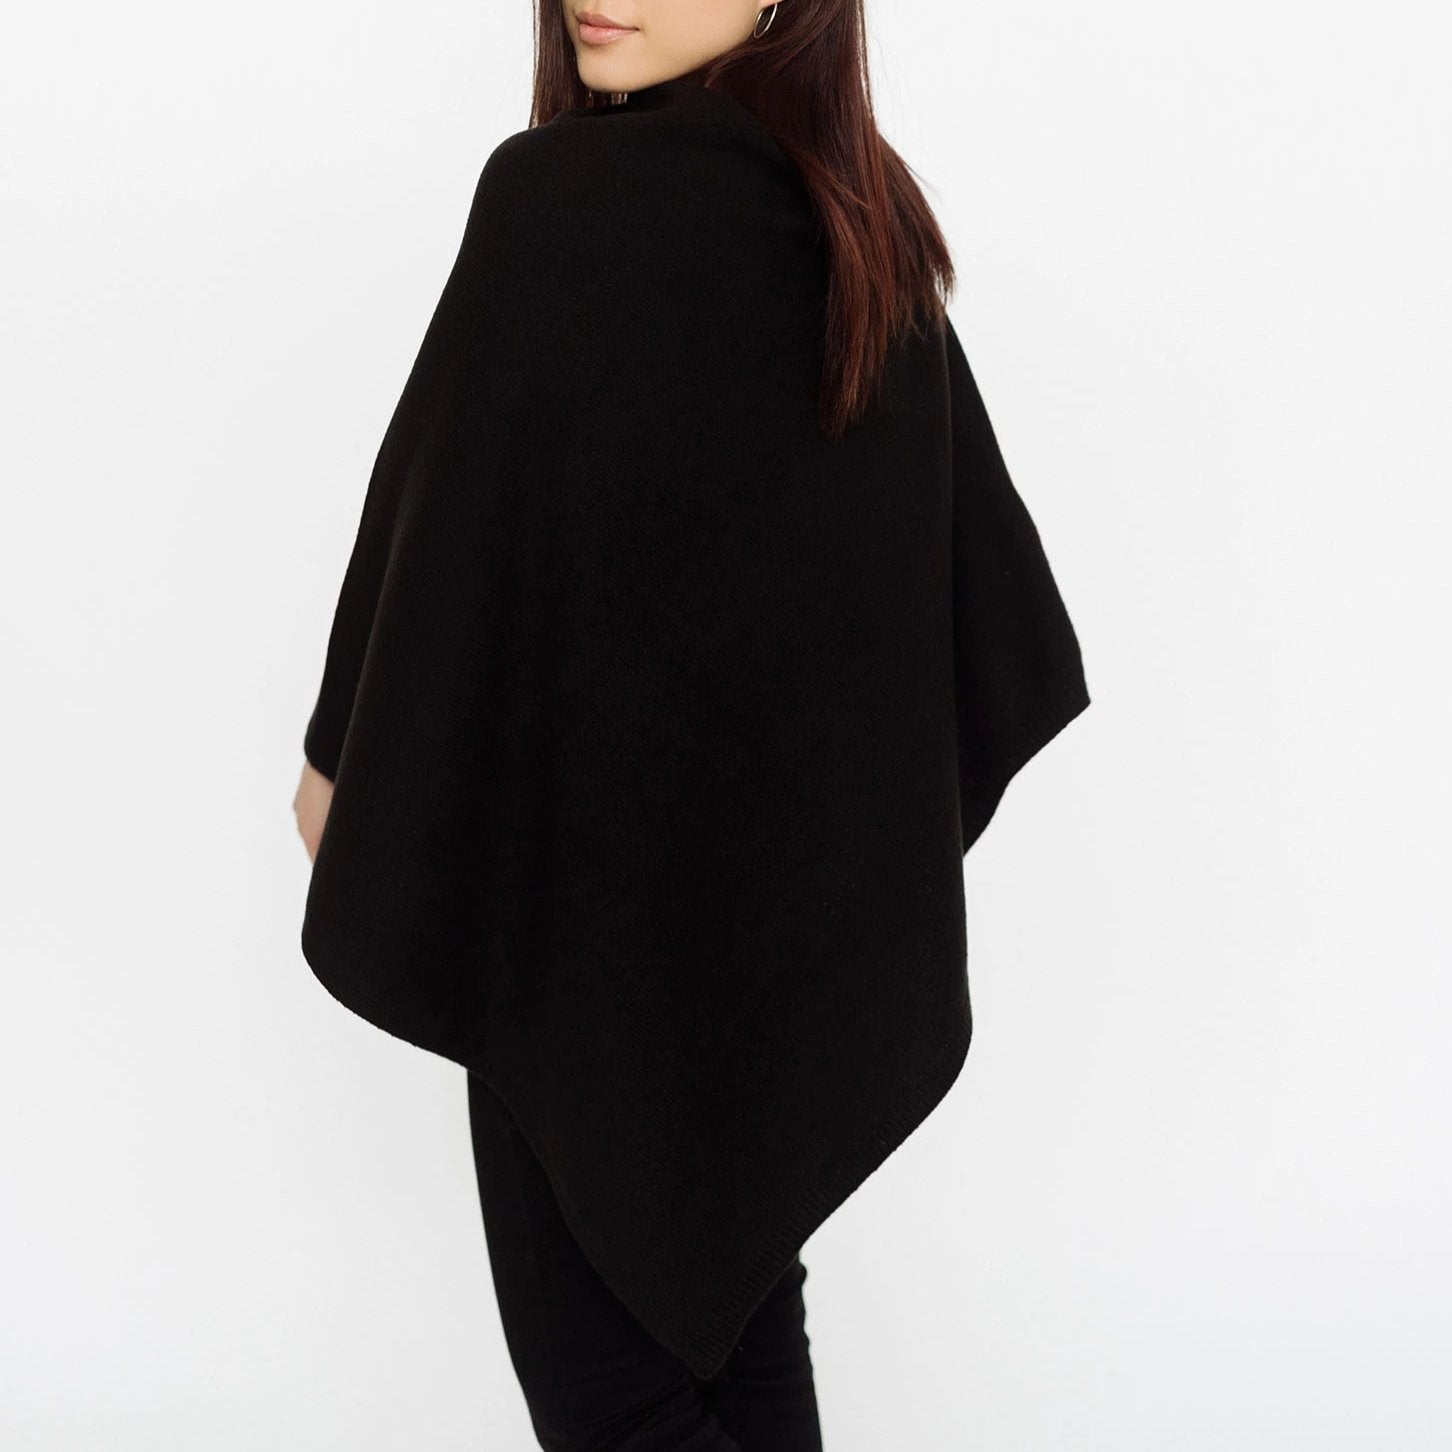 Pudus Women's Soft Faux Cashmere Poncho Sweater - Use as a Coat, Cape, Shawl, Wrap, or Blanket Poncho Black Poncho